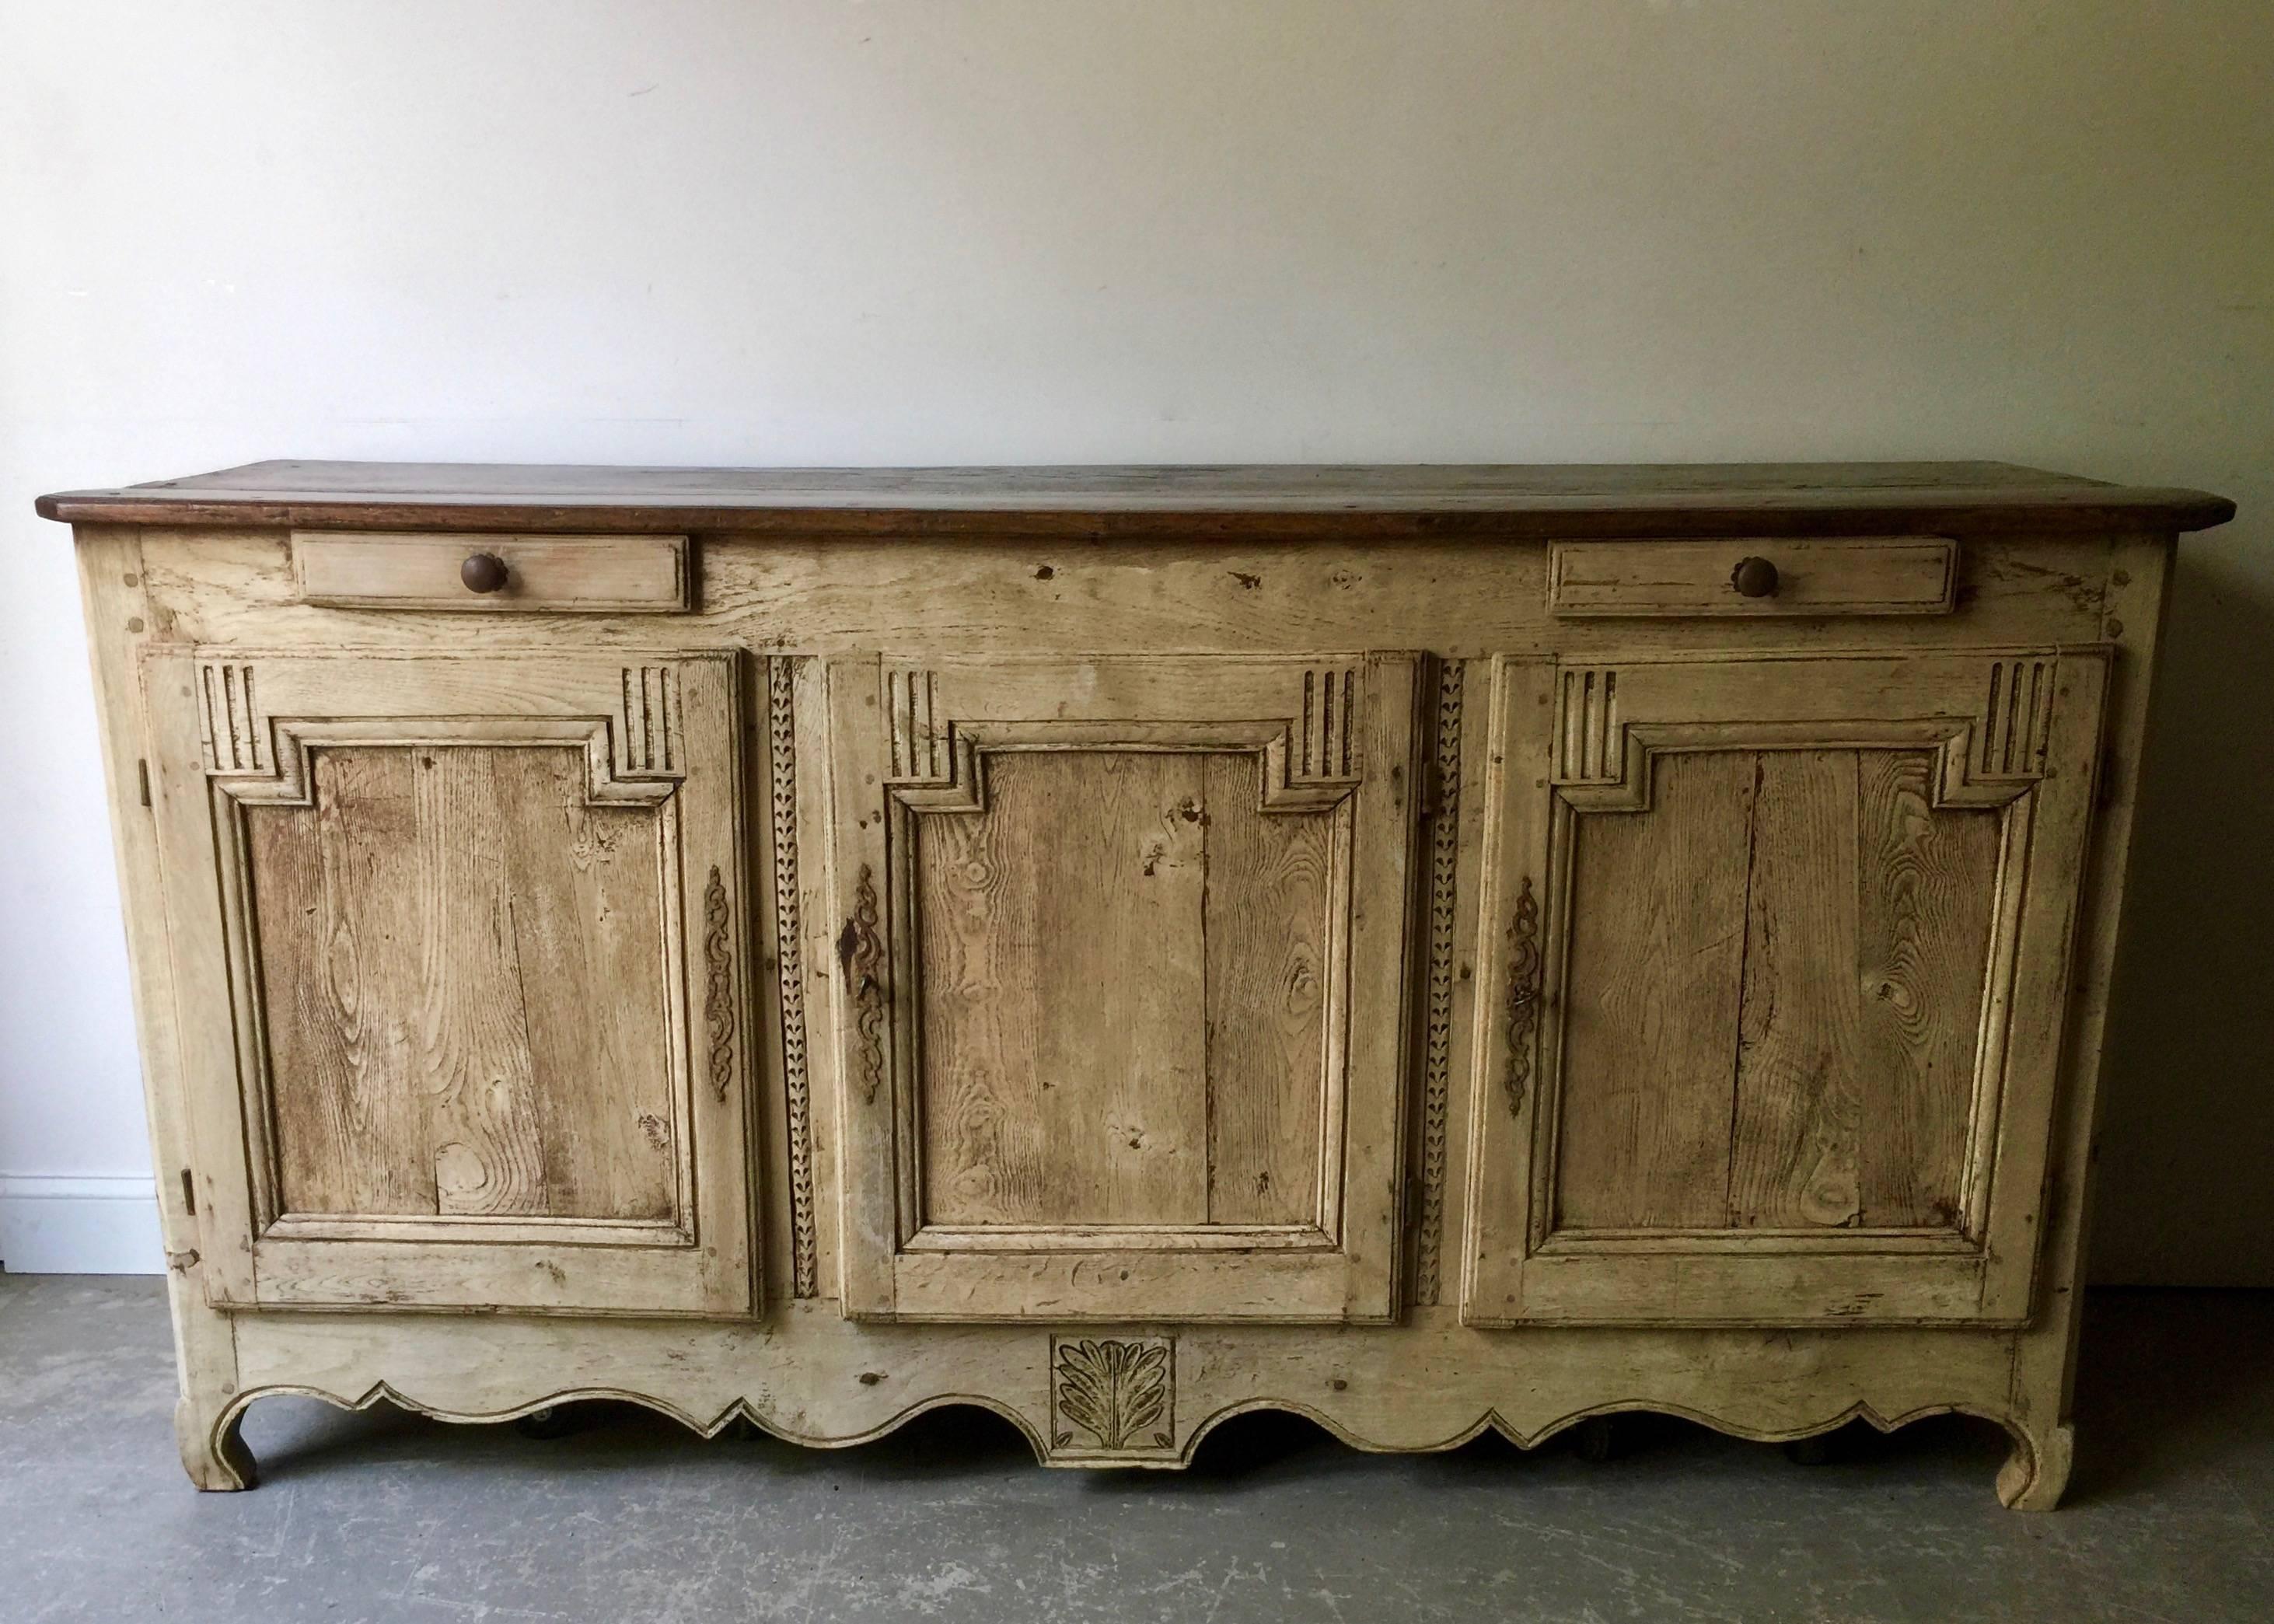 Handsome 18th century enfilade transition in Louis XV and Louis XVI period with three raised panel doors and drawers, carefully carved apron in superb bleached patina all topped with beautifully worn darker oak top
France, circa 1750.
 